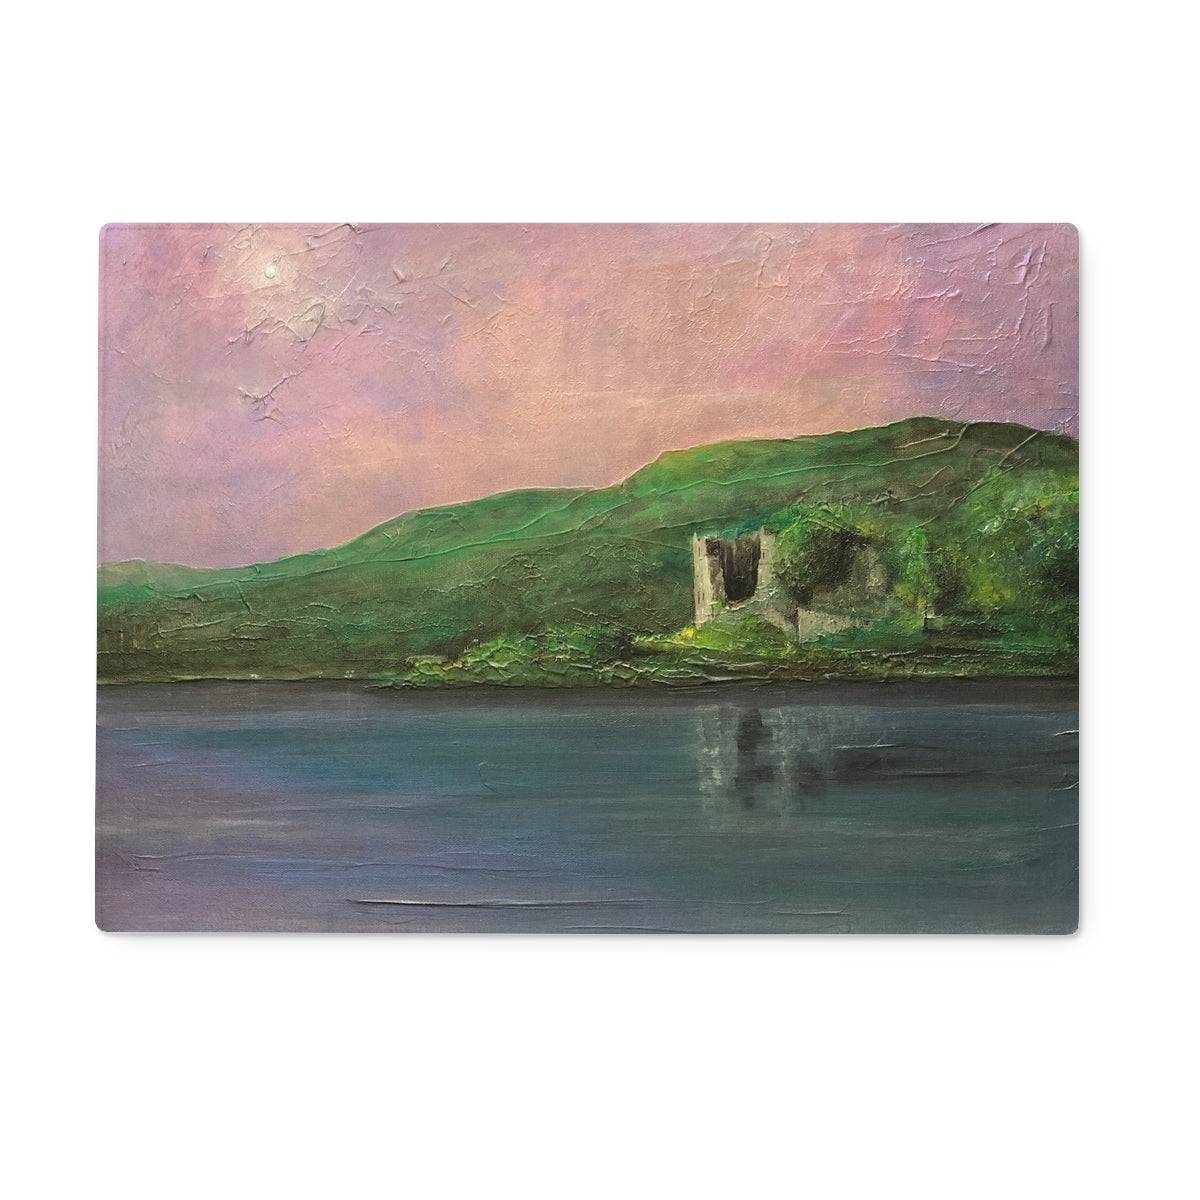 Old Castle Lachlan Art Gifts Glass Chopping Board-Glass Chopping Boards-Historic & Iconic Scotland Art Gallery-15"x11" Rectangular-Paintings, Prints, Homeware, Art Gifts From Scotland By Scottish Artist Kevin Hunter